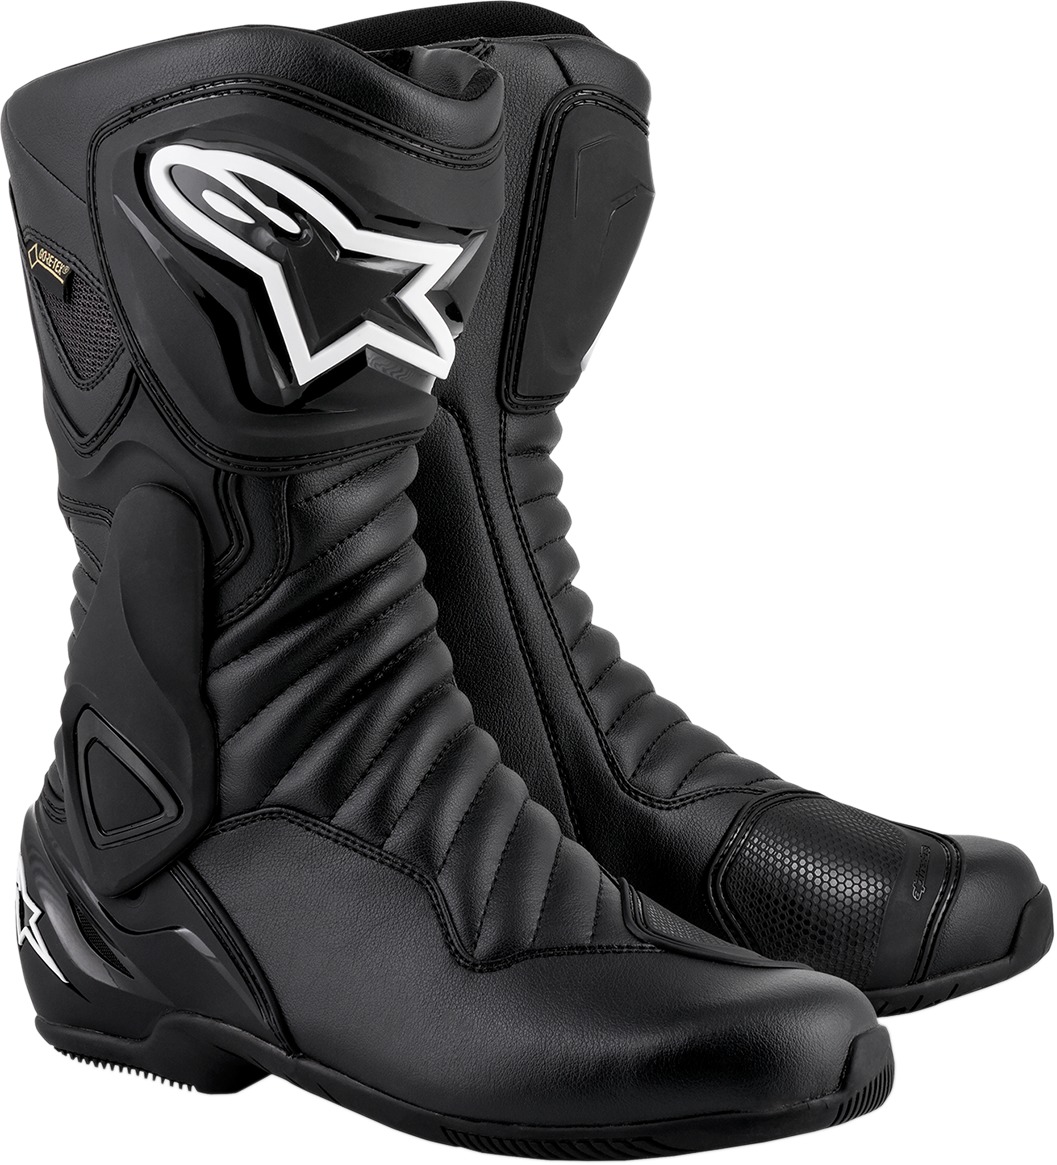 SMX-6 GTX Street Riding Boots Black US 9.5 - Click Image to Close